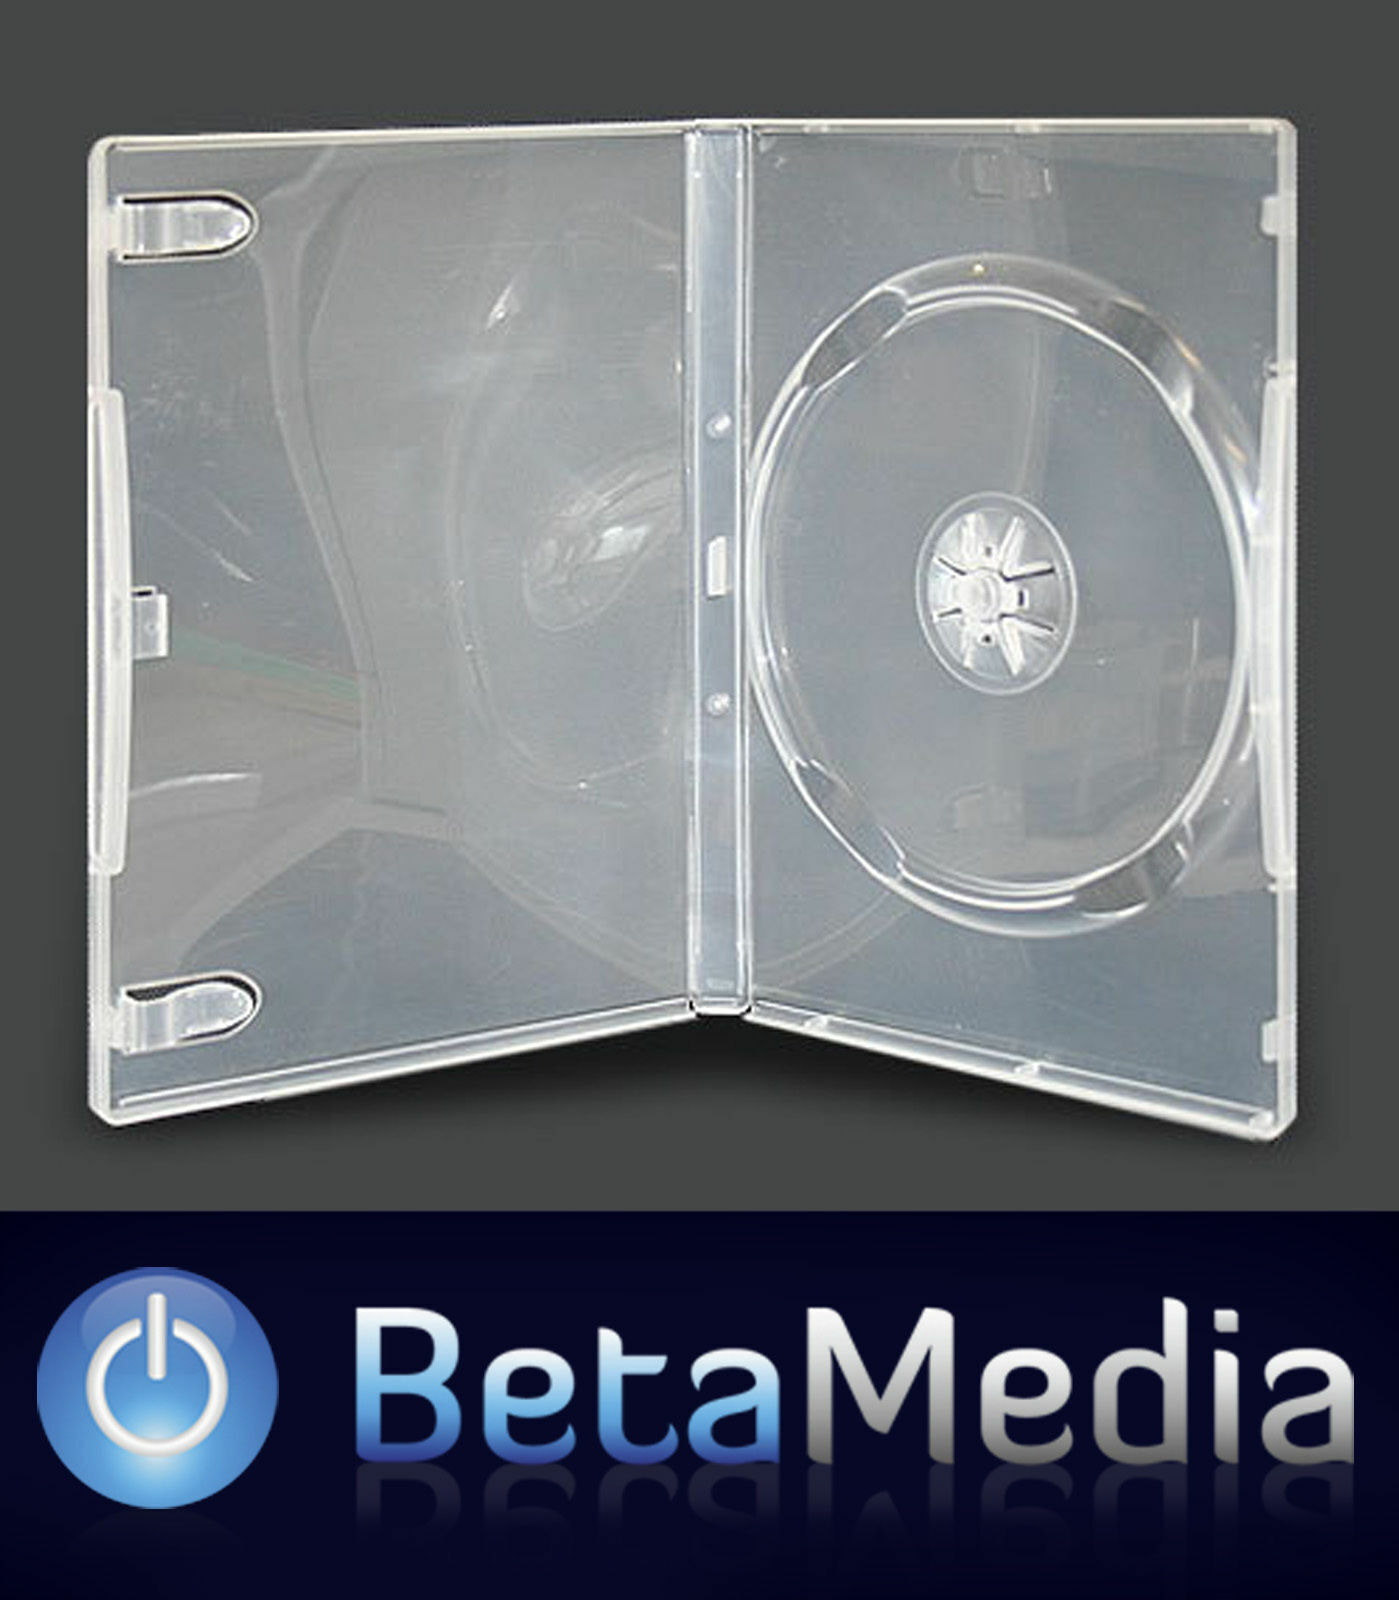 100 x Single Clear 14mm Quality CD / DVD Cover Cases - Standard Size DVD case